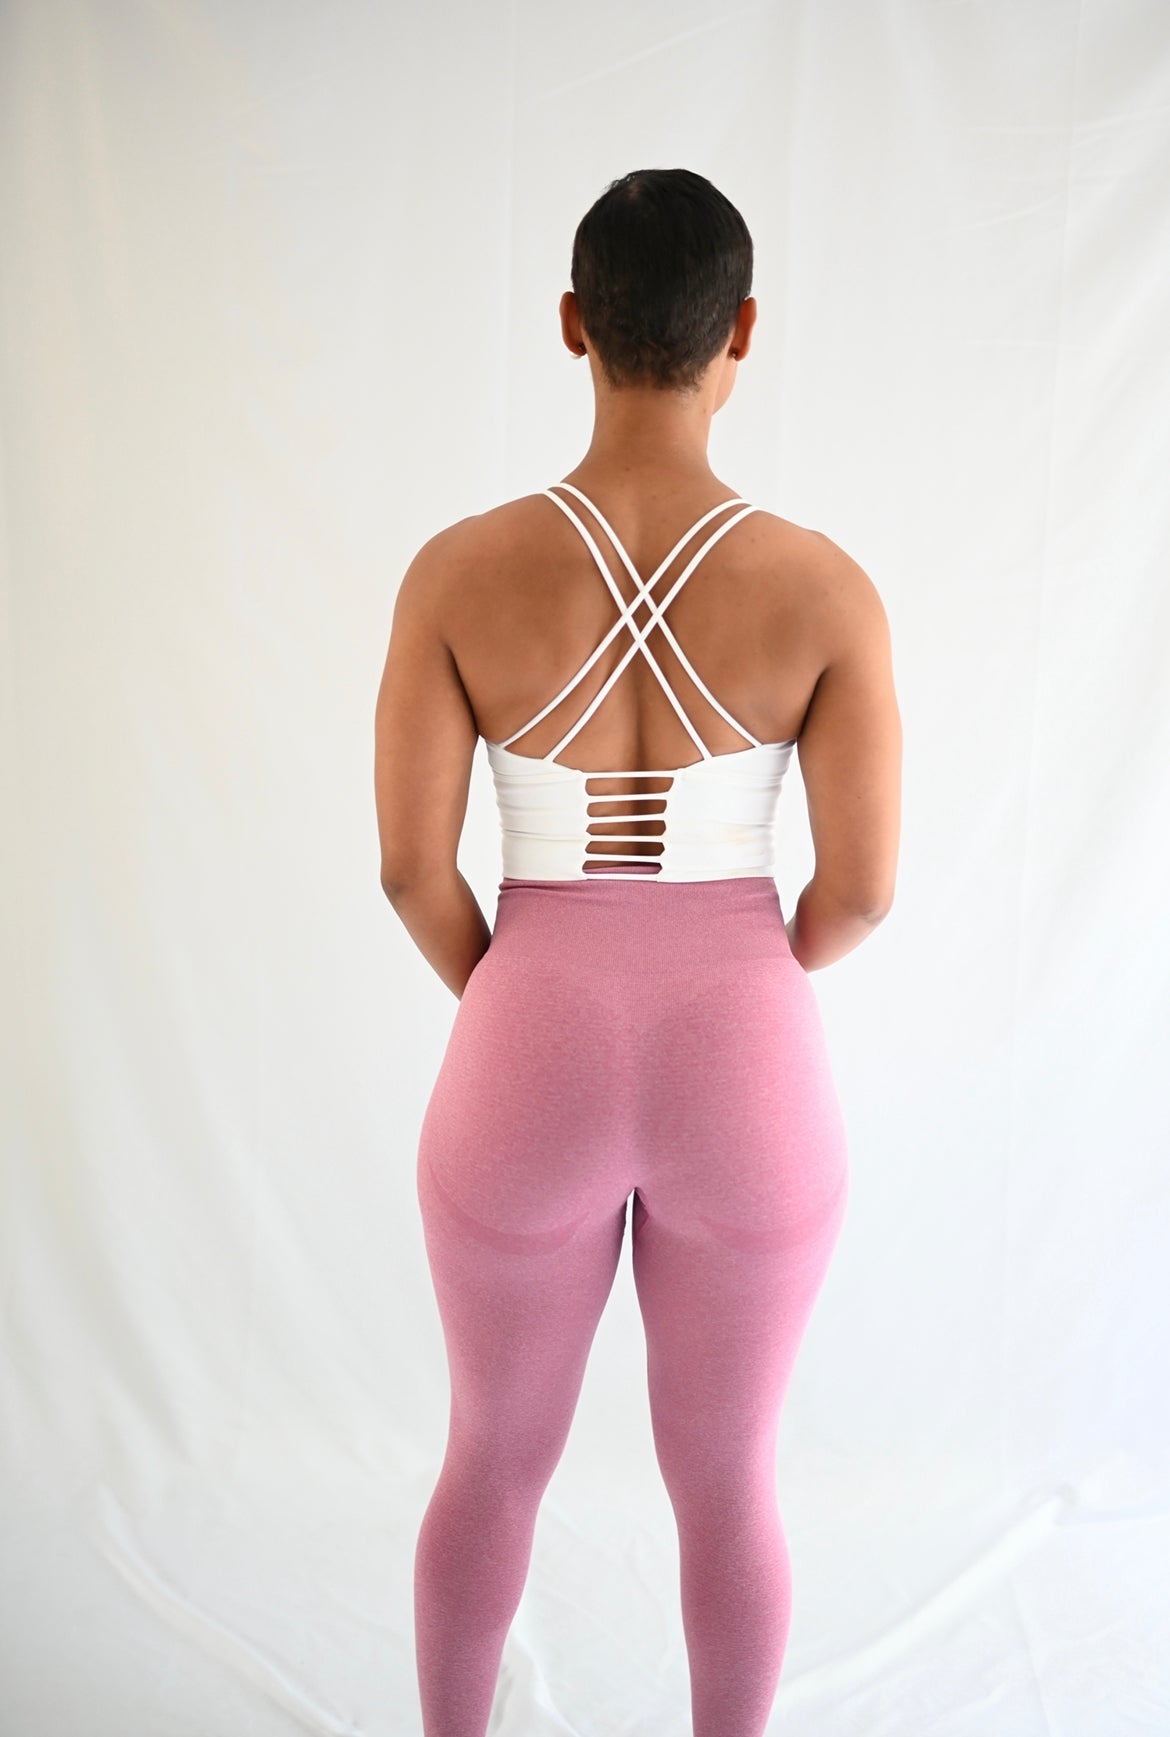 Flesh colored leggings': Fashionistas rise up against universally heinous  'faux pas' of the fashion world - CheezCake - Parenting, Relationships, Food